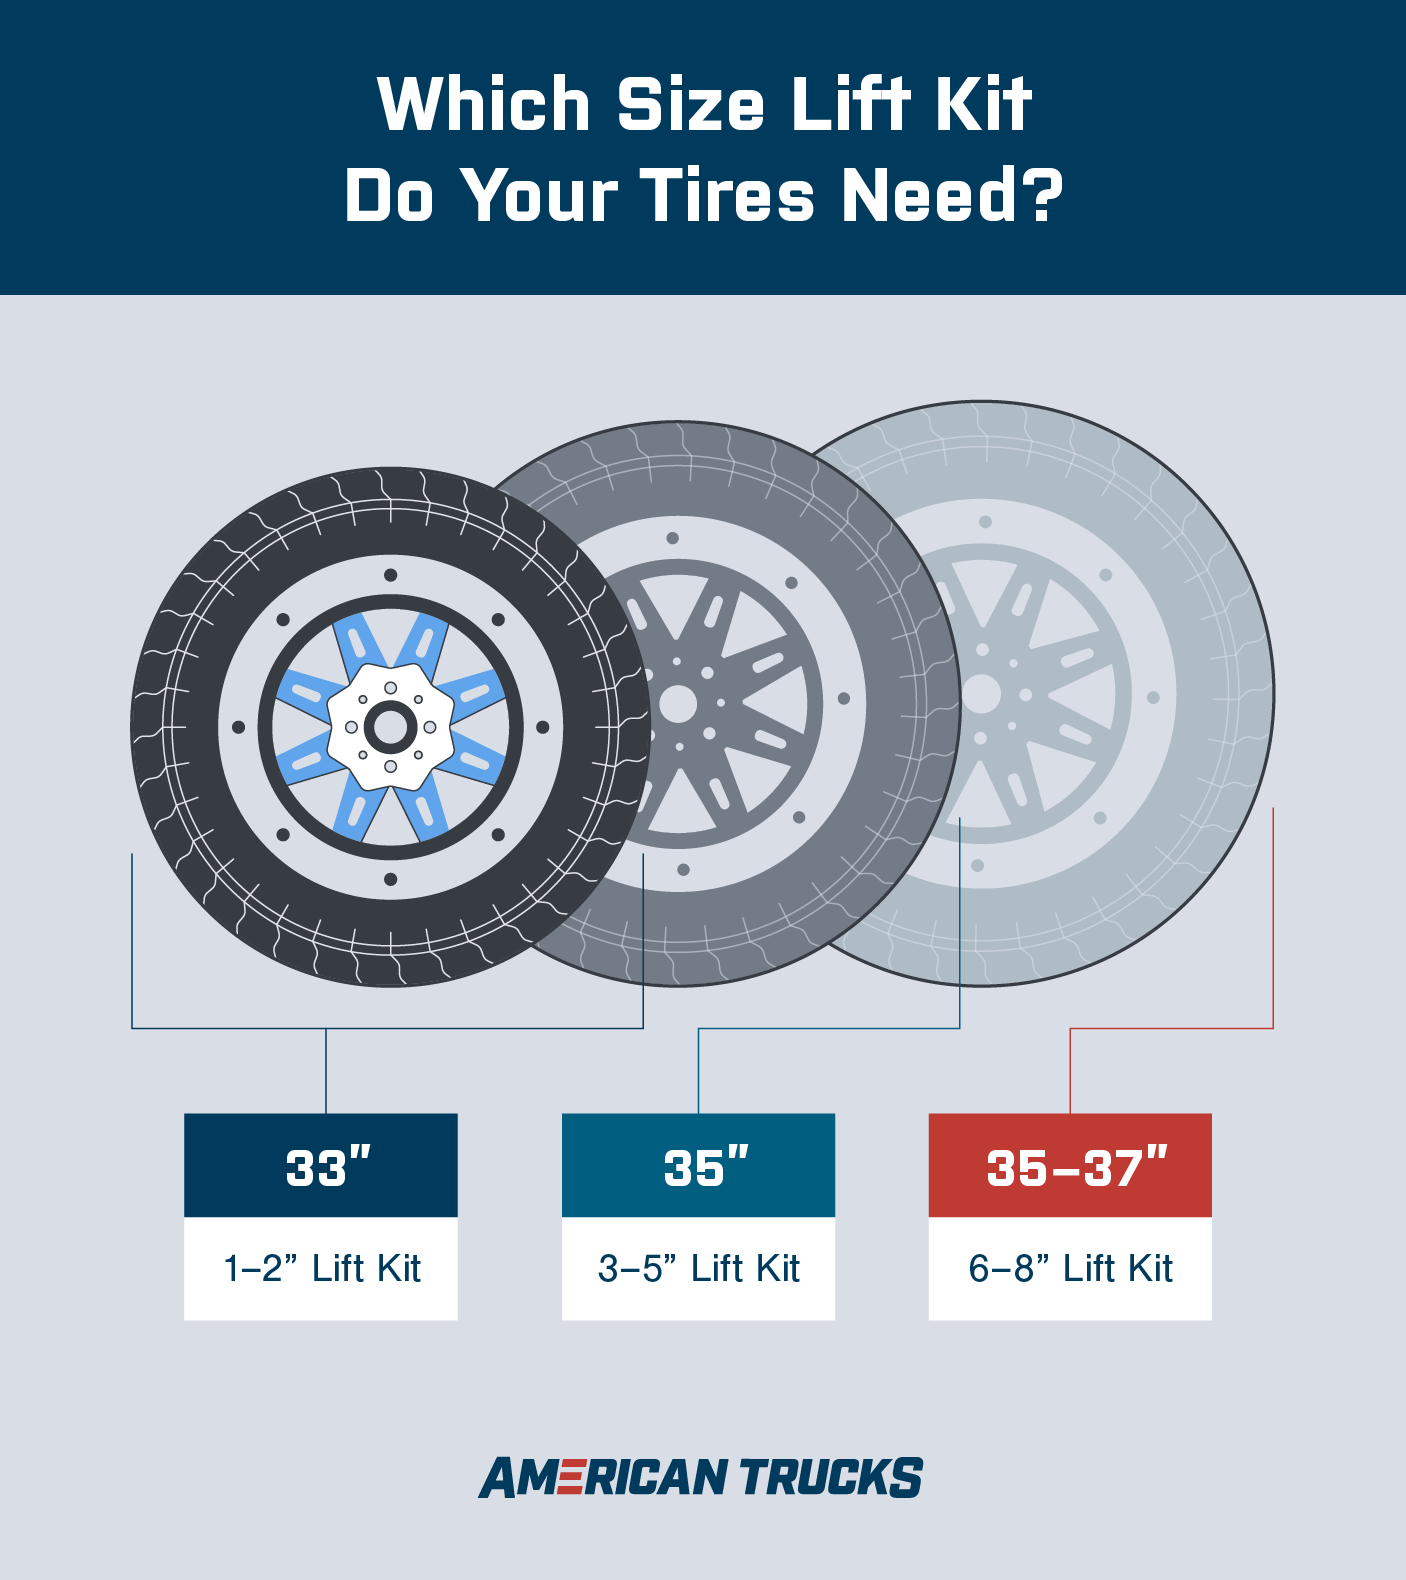 Illustrated diagram showing which size lift kits are needed for various tire sizes, including 1-2 inch kit for 33 inch wheels, 3-5 inch kit for 35 inch tires, and 6-8 inch kit for 35-37 inch tires